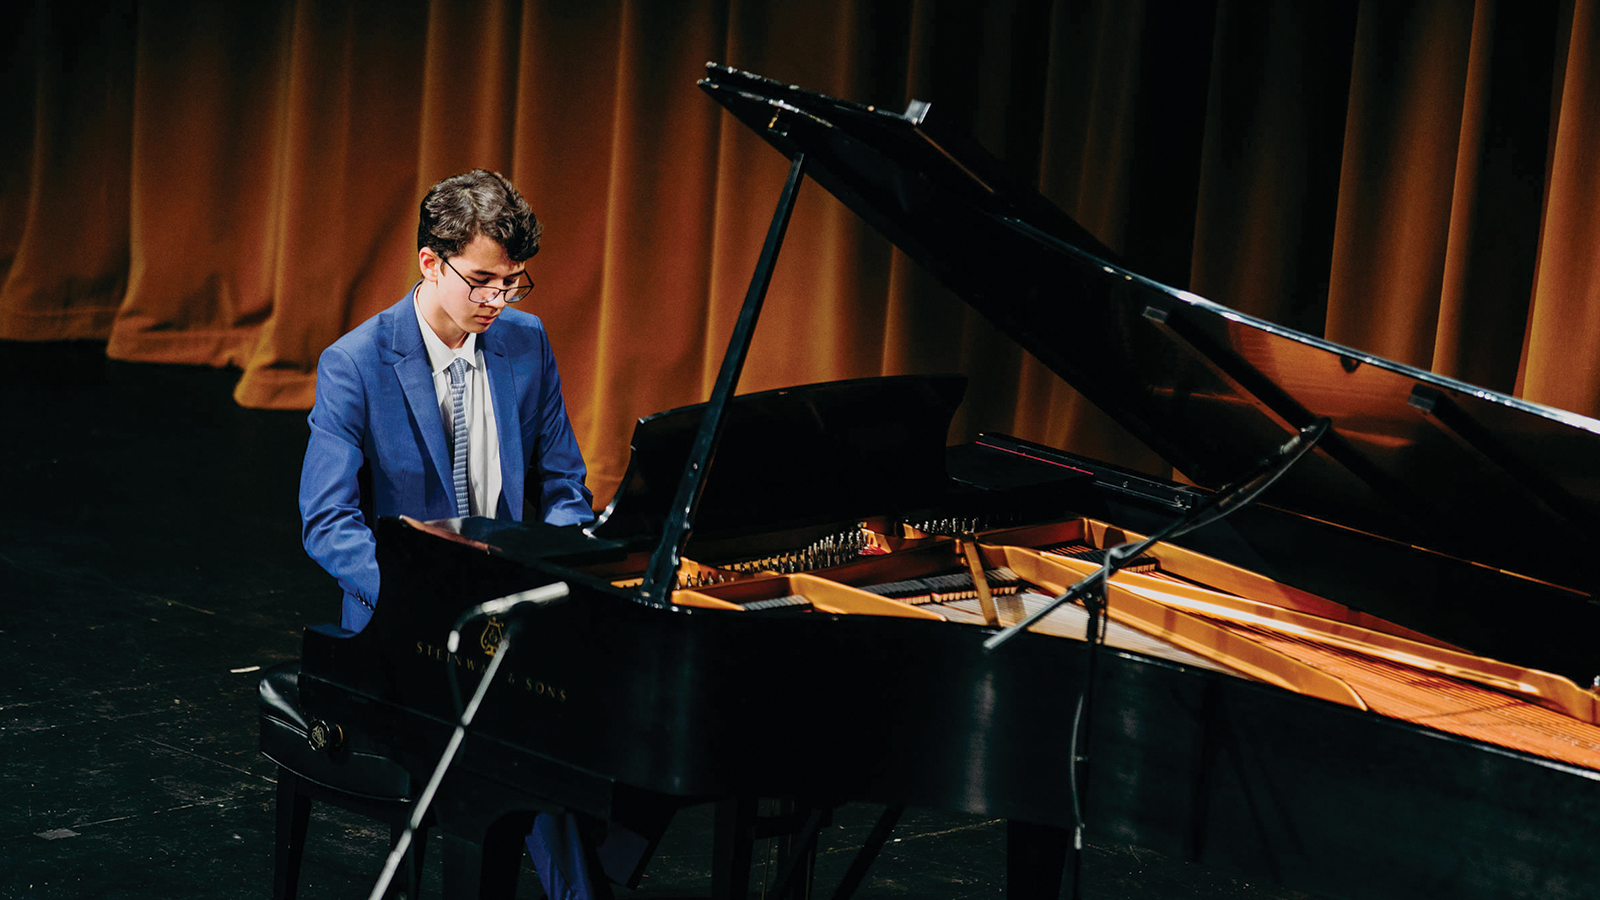 person in a blue suit playing a black piano